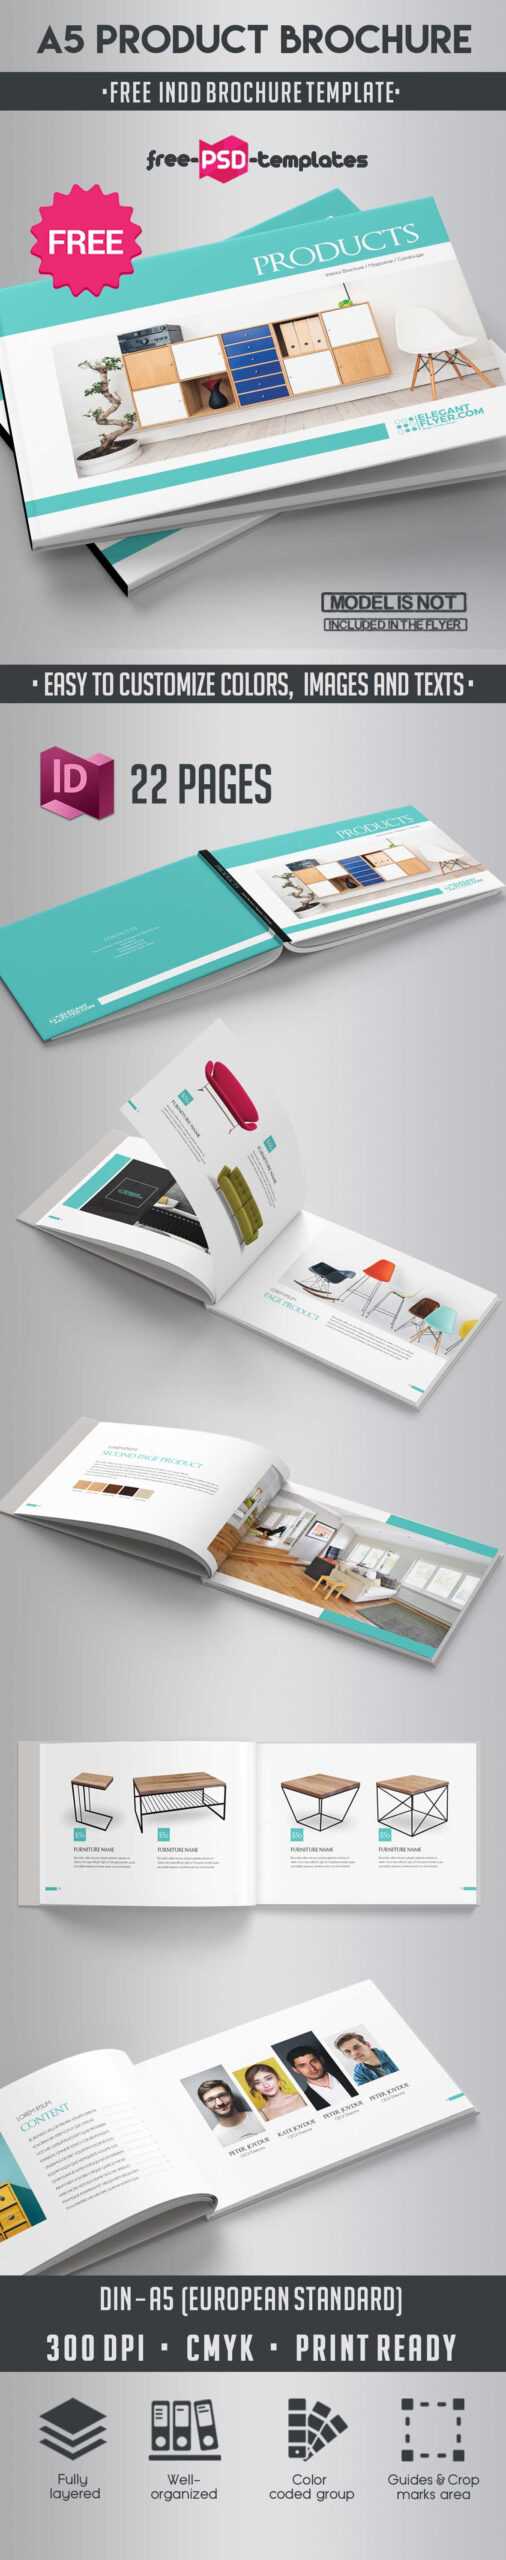 Free A5 Product Catalog Brochure Indd Template | Free Psd Regarding Product Brochure Template Free